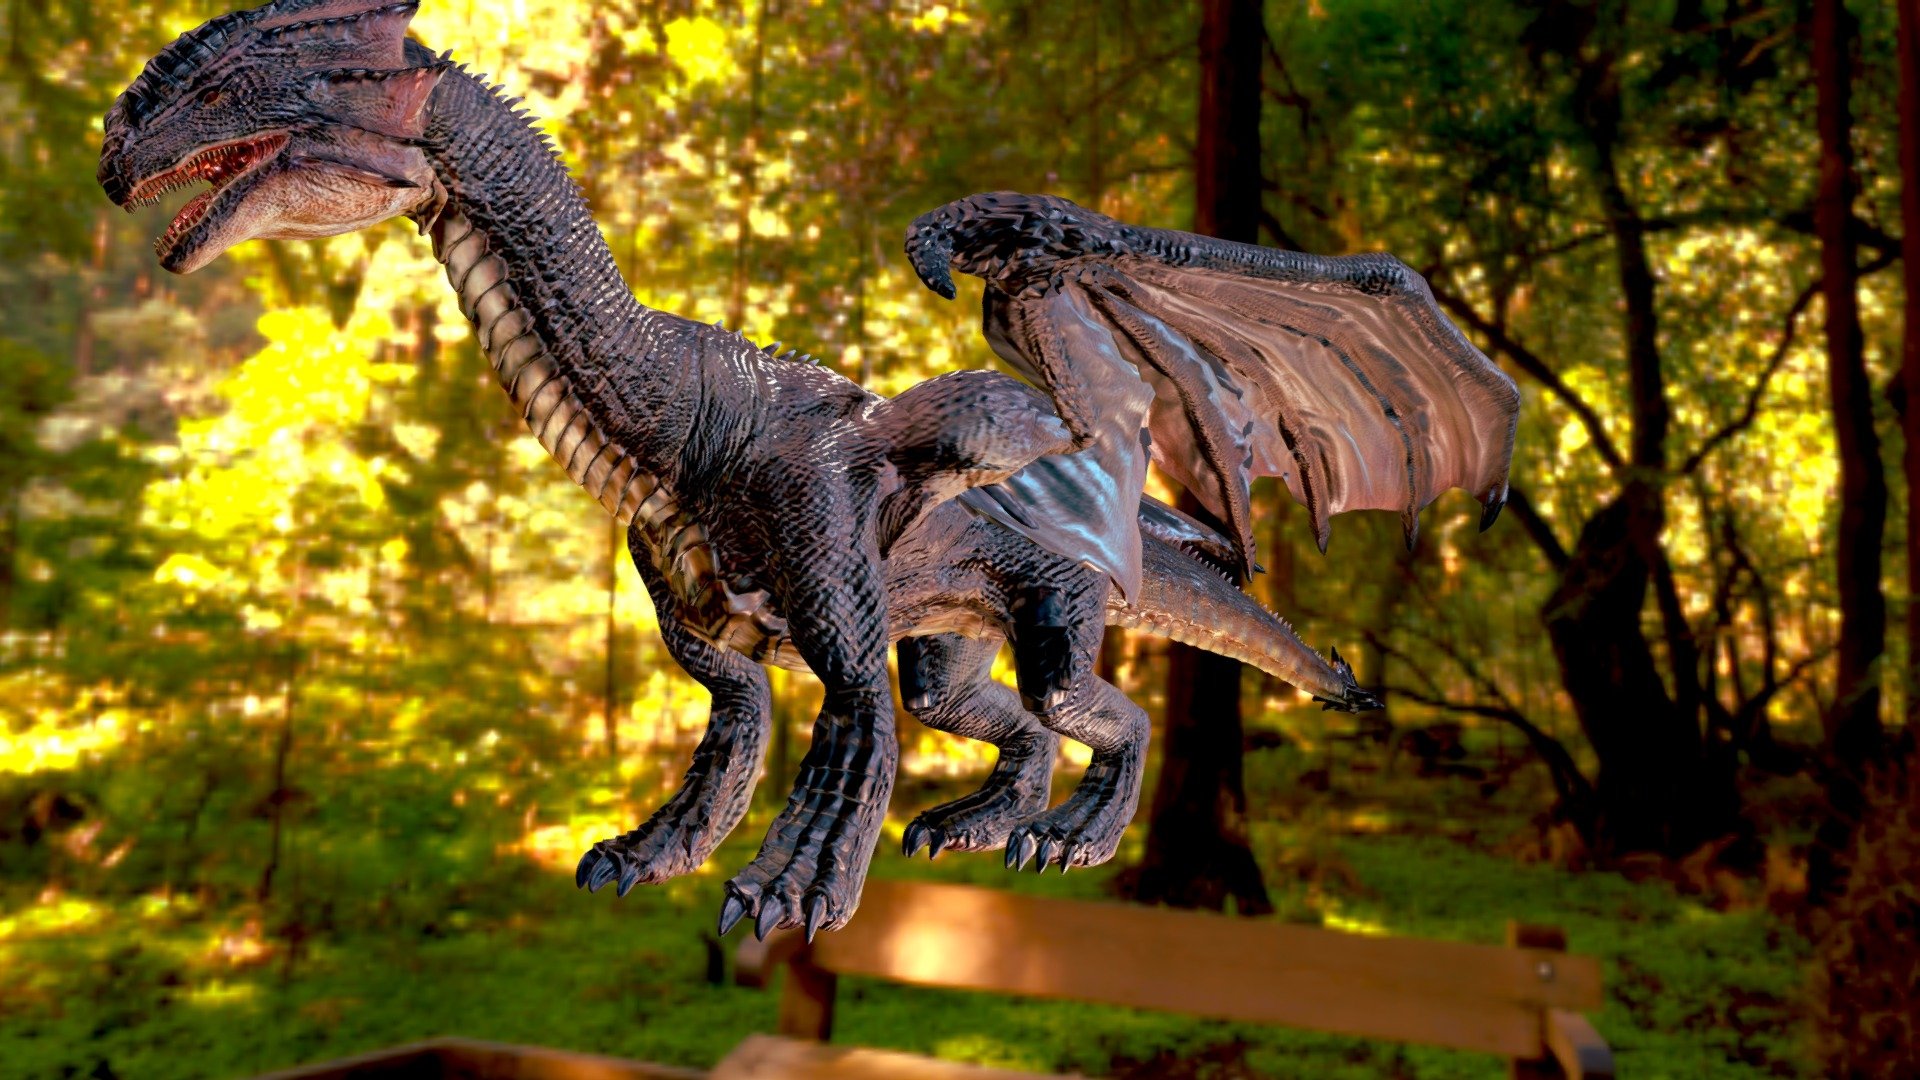 GET THIS High detail and realistic WYVERN DRAGON volans 3D model,
This is a 3D WYVERN DRAGON volans 3D MODEL of a high-end photorealistic and cartoon 3D models of dinosaurs RIGGED in Blender.
DOWNLOAD 3D MODEL; https://sites.google.com/view/3d-models-download-rdam/models-3ds-max-maya-c4d-unity-unreal-blender
You can check the individual models of WYVERN DRAGON volans

8240/8240 - ID of DRAGON Draco volans BLEND, MAX, MAYA, UNITY, UNREAL, C4D, FBX

Originally created with 3ds Max 2016 and saved as BLENDER, MAYA, 3DS MAX, UNITY, UNREAL, CINEMA 4D FBX AND 3ds Max 2013 
 render parameters are available, you can render it directly

Please check out my other models, just click on my user name to see complete gallery RDAM STUDIO
Thank you for choosing my model, I hope you like it!
Rig Description

BLENDER 3.0
&lsquo;Auto rig'
&lsquo;complet facial rig - WYVERN DRAGON - 3D model by Rdam 3D Pictures (@rdam) 3d model